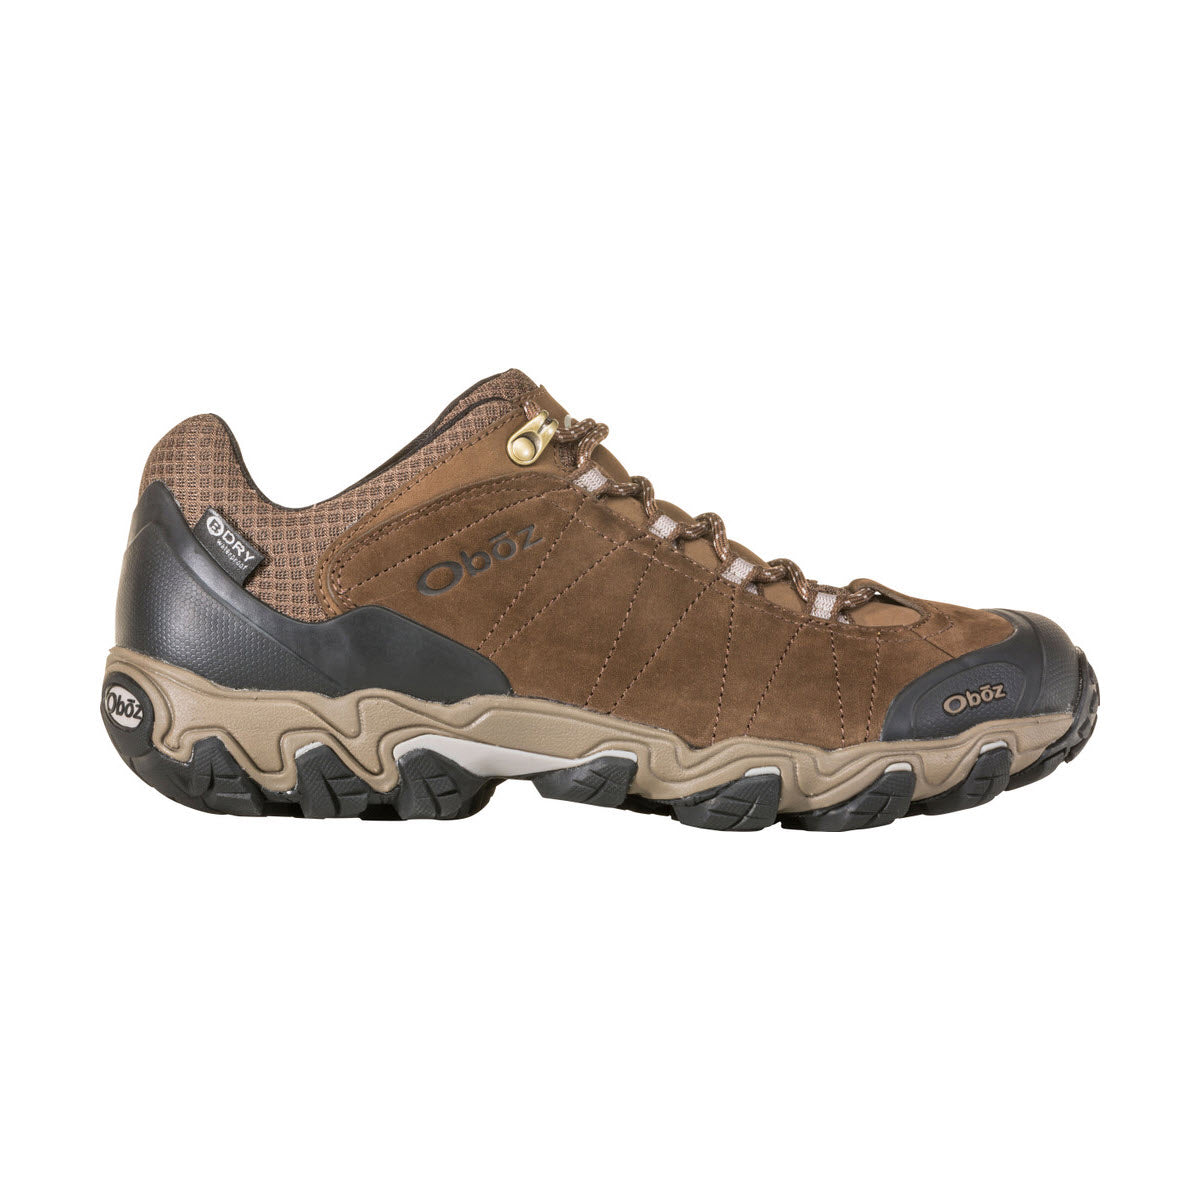 A single brown Oboz Bridger Low WP Canteen hiking shoe with a rugged, aggressive outsole and lace-up front, displayed against a white background.